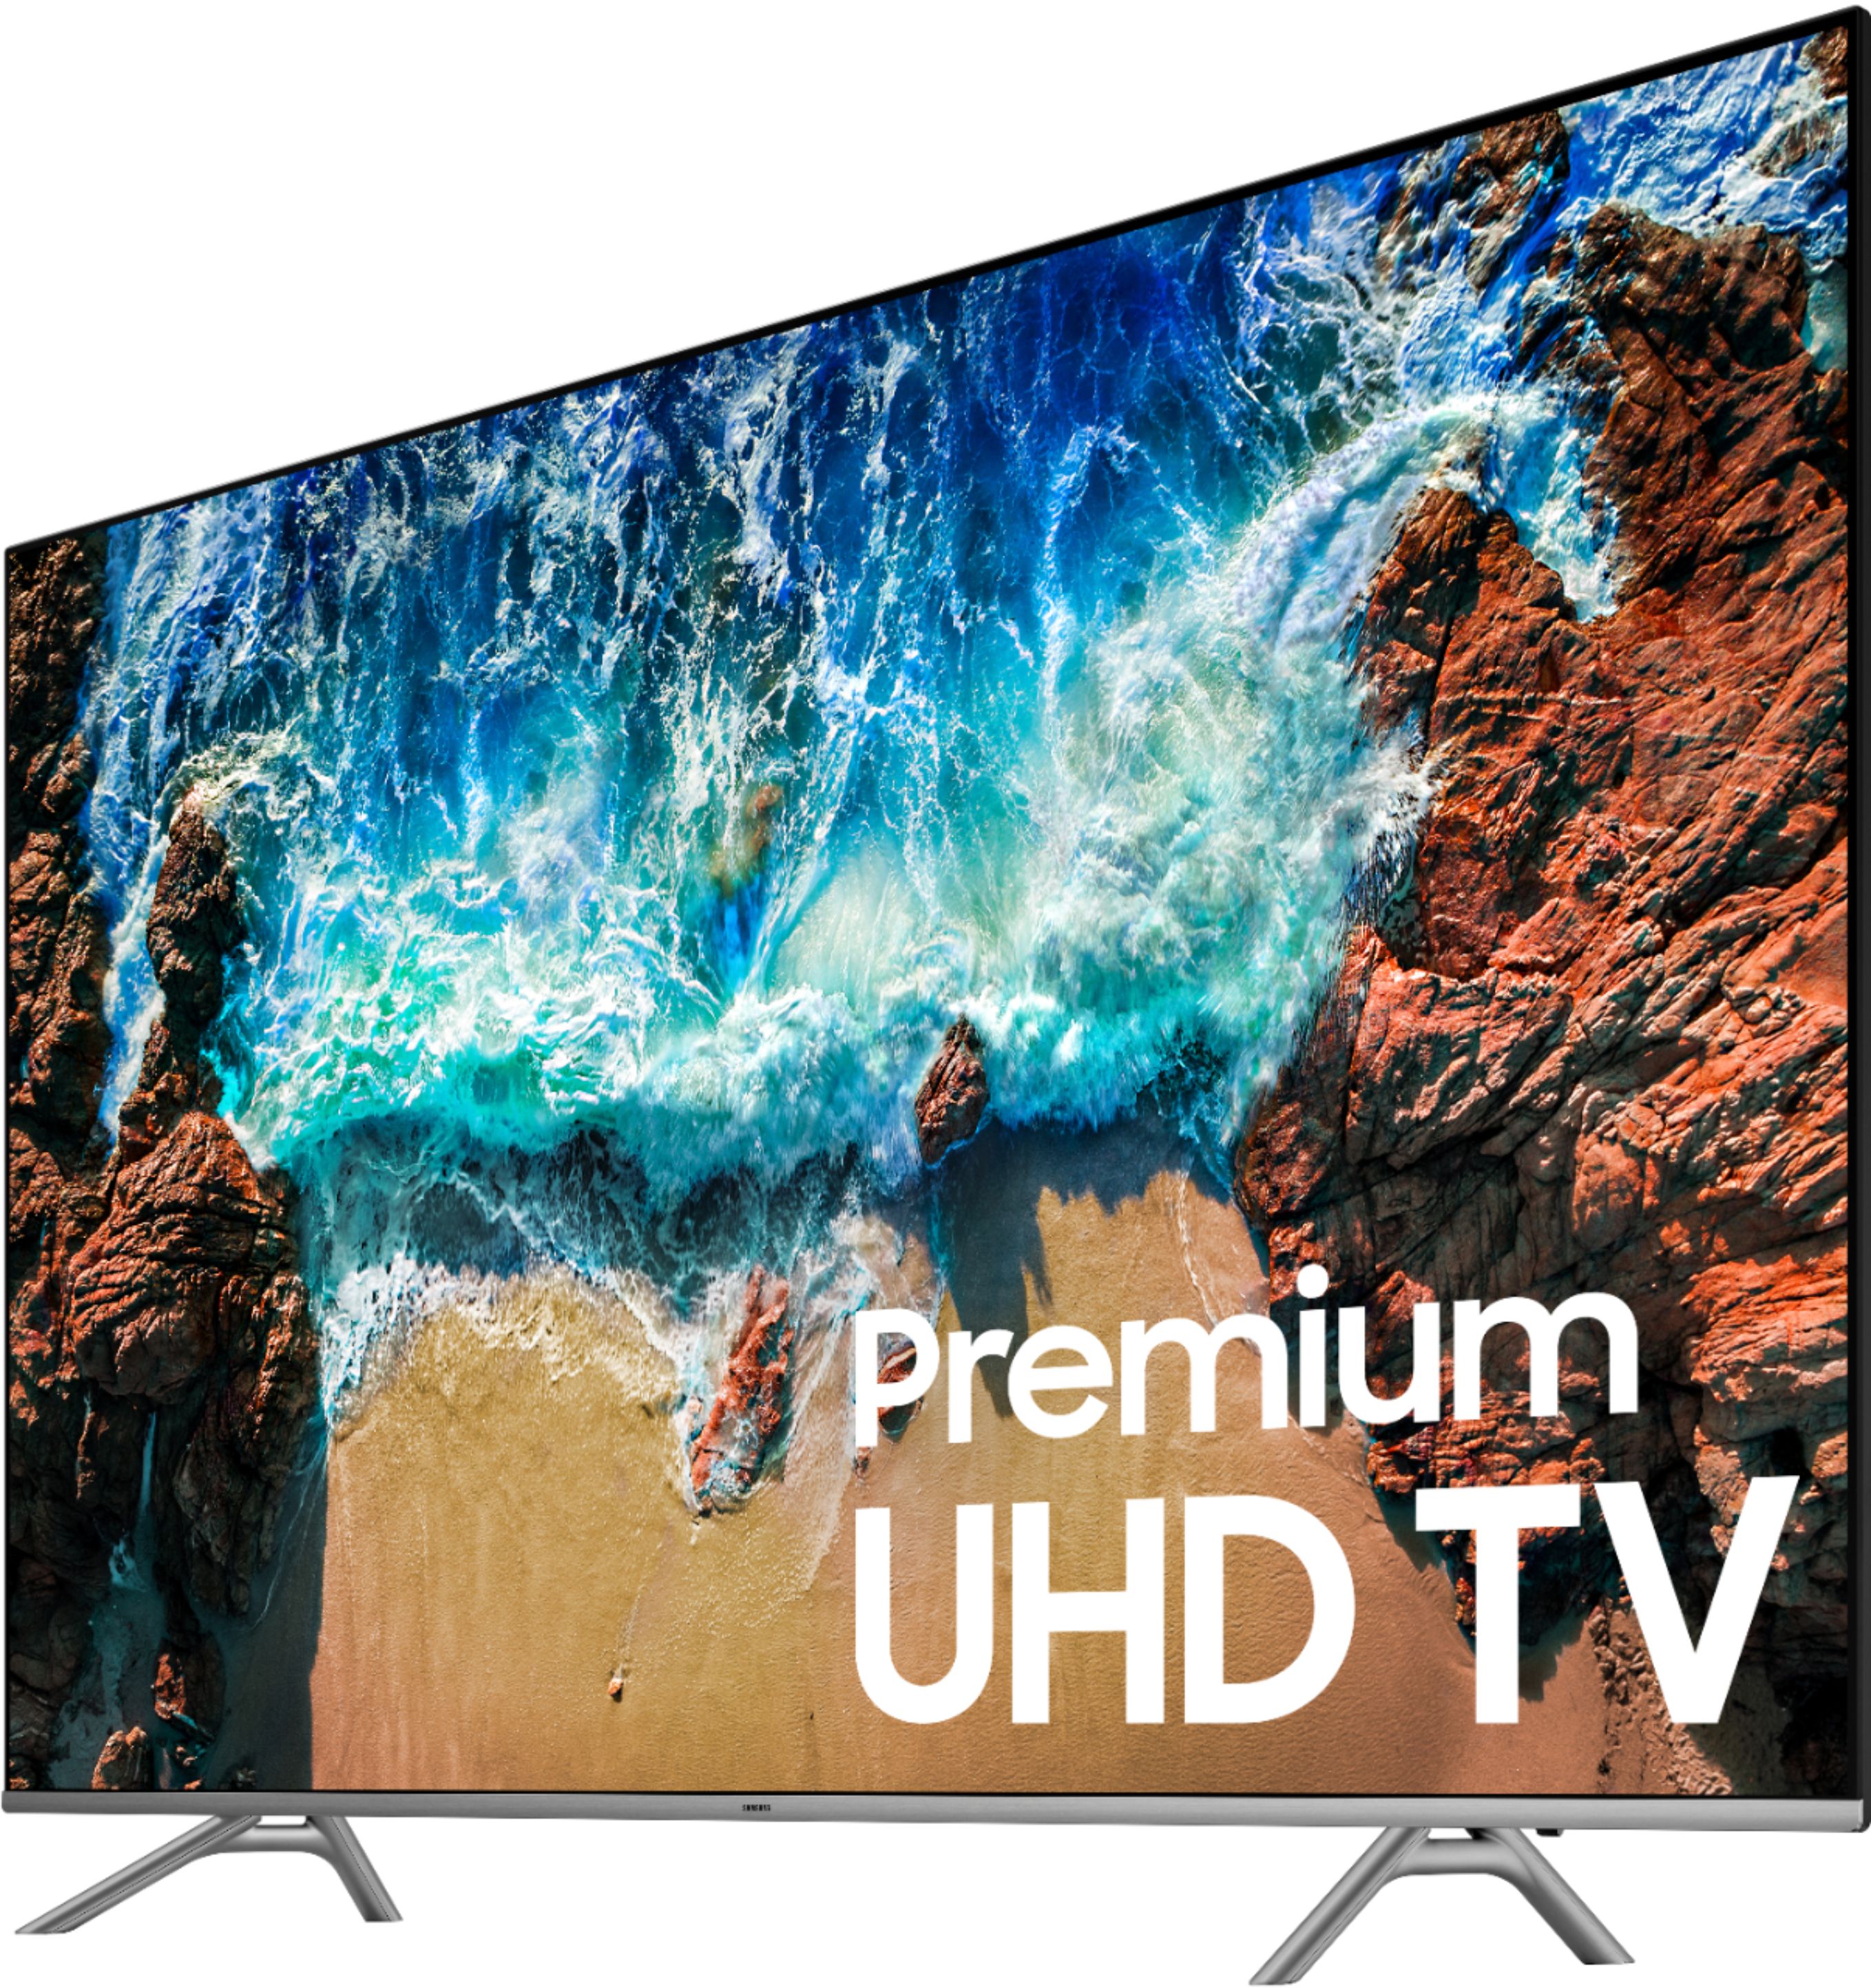 8 Series 4K UHD TV with HDR Smart LED Samsung 49" Class 2160p